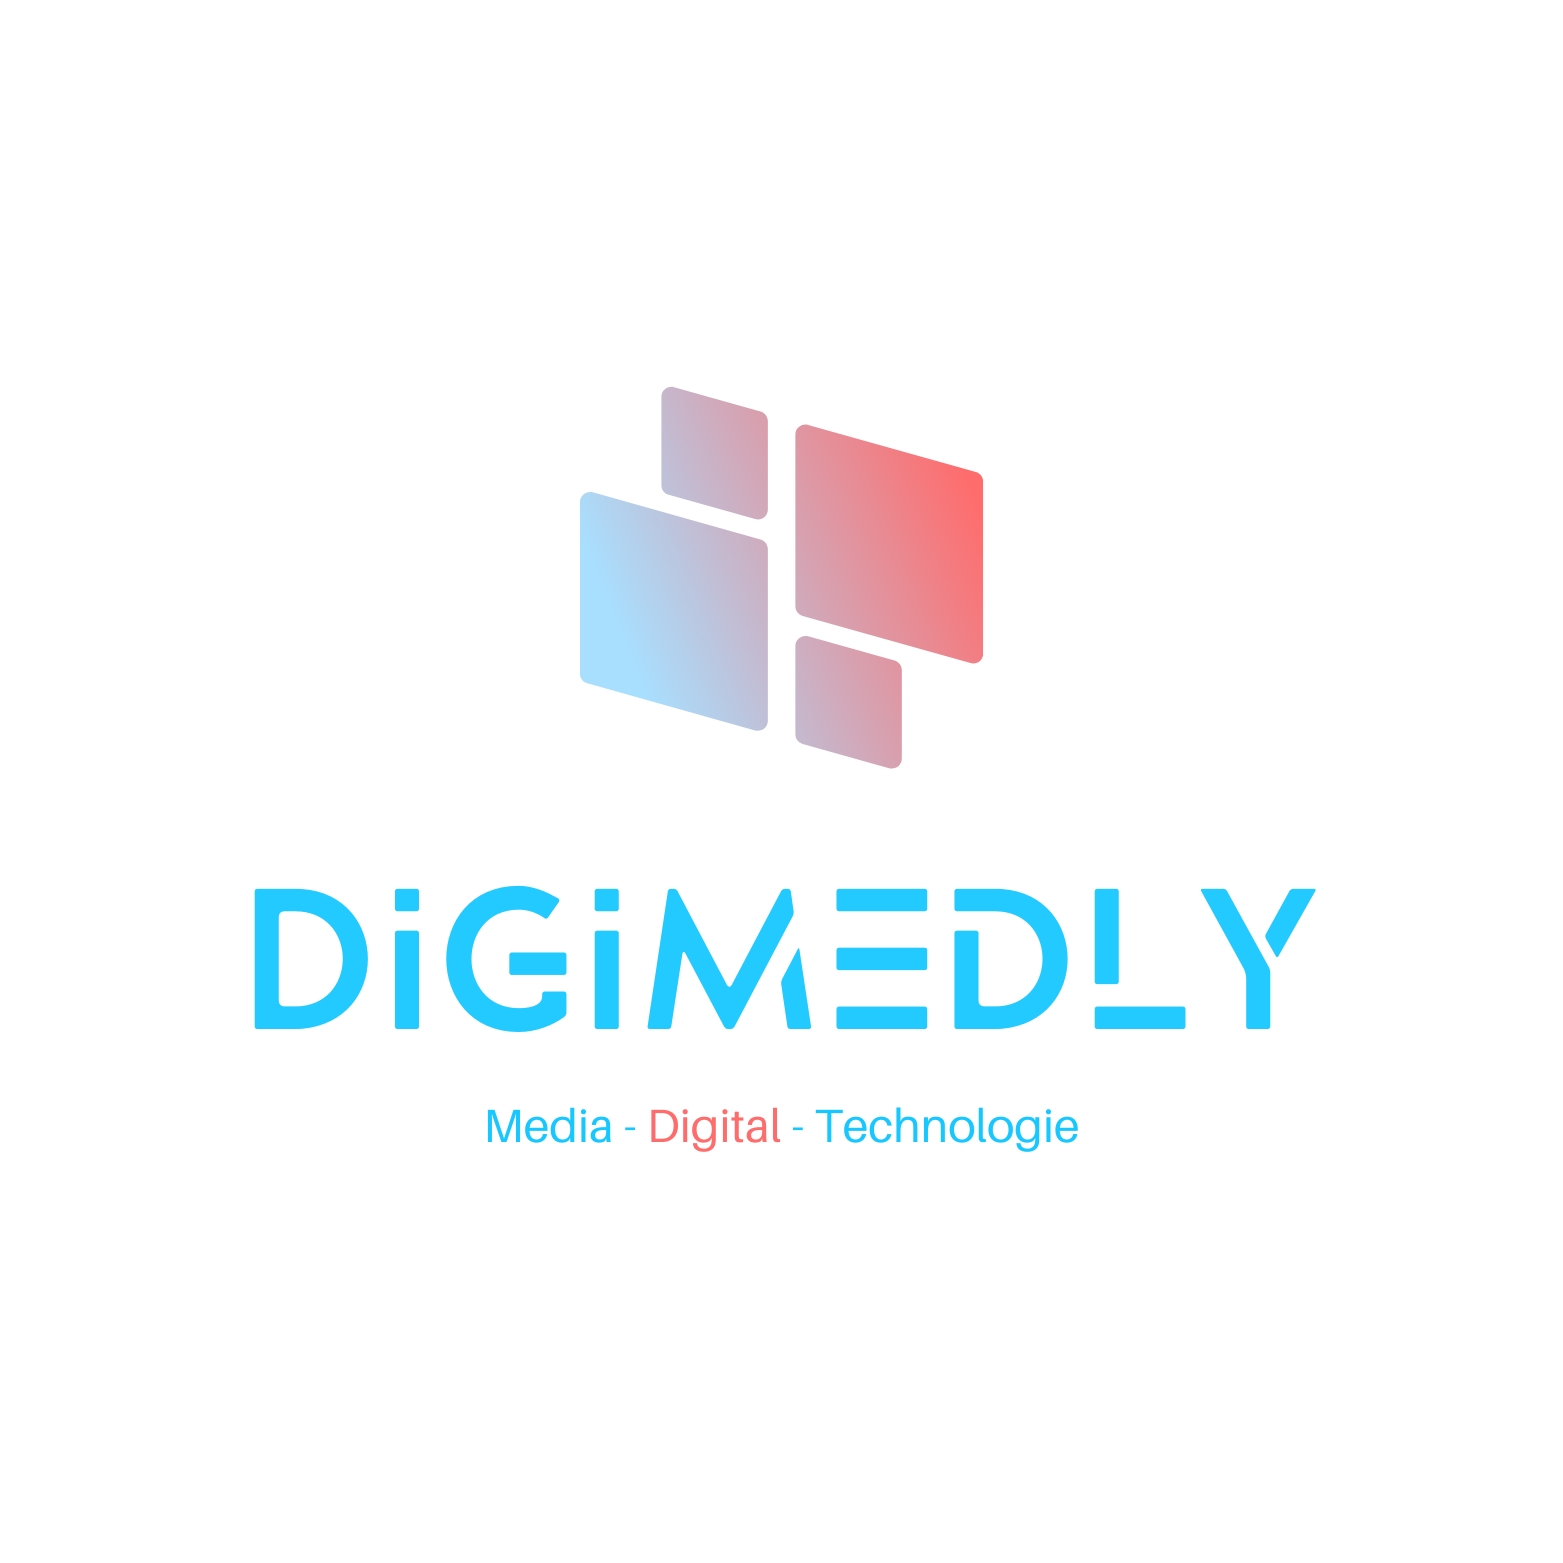 DIGIMEDLY